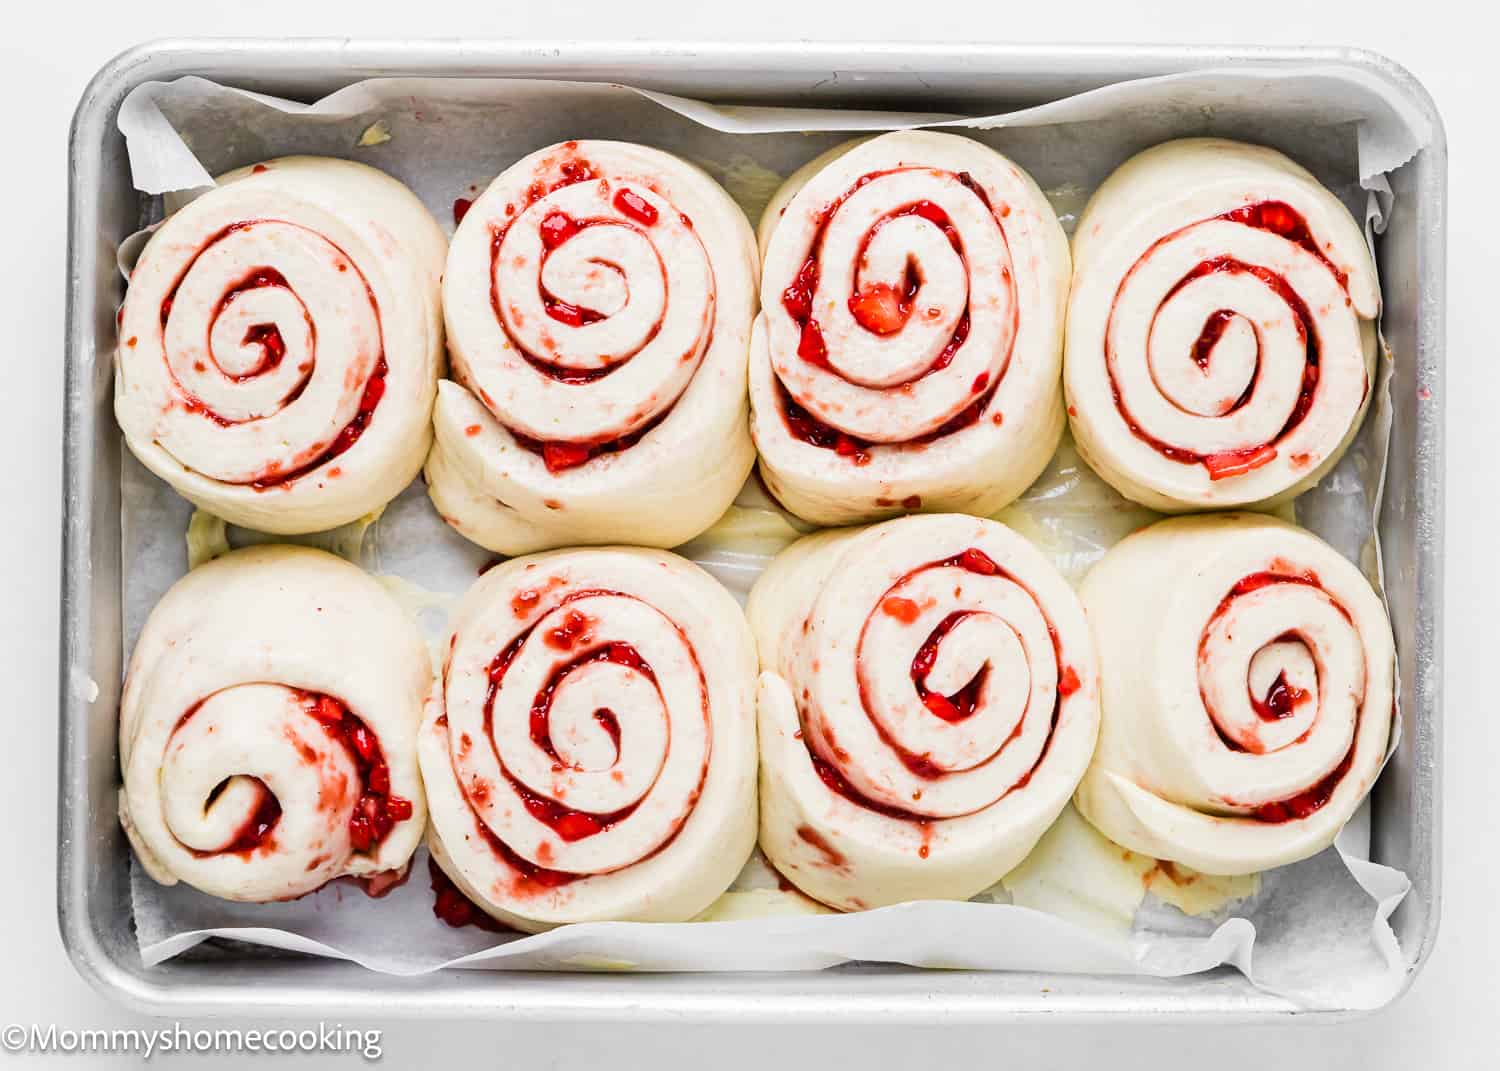 risen unbaked Strawberry Rolls in a baking tray.